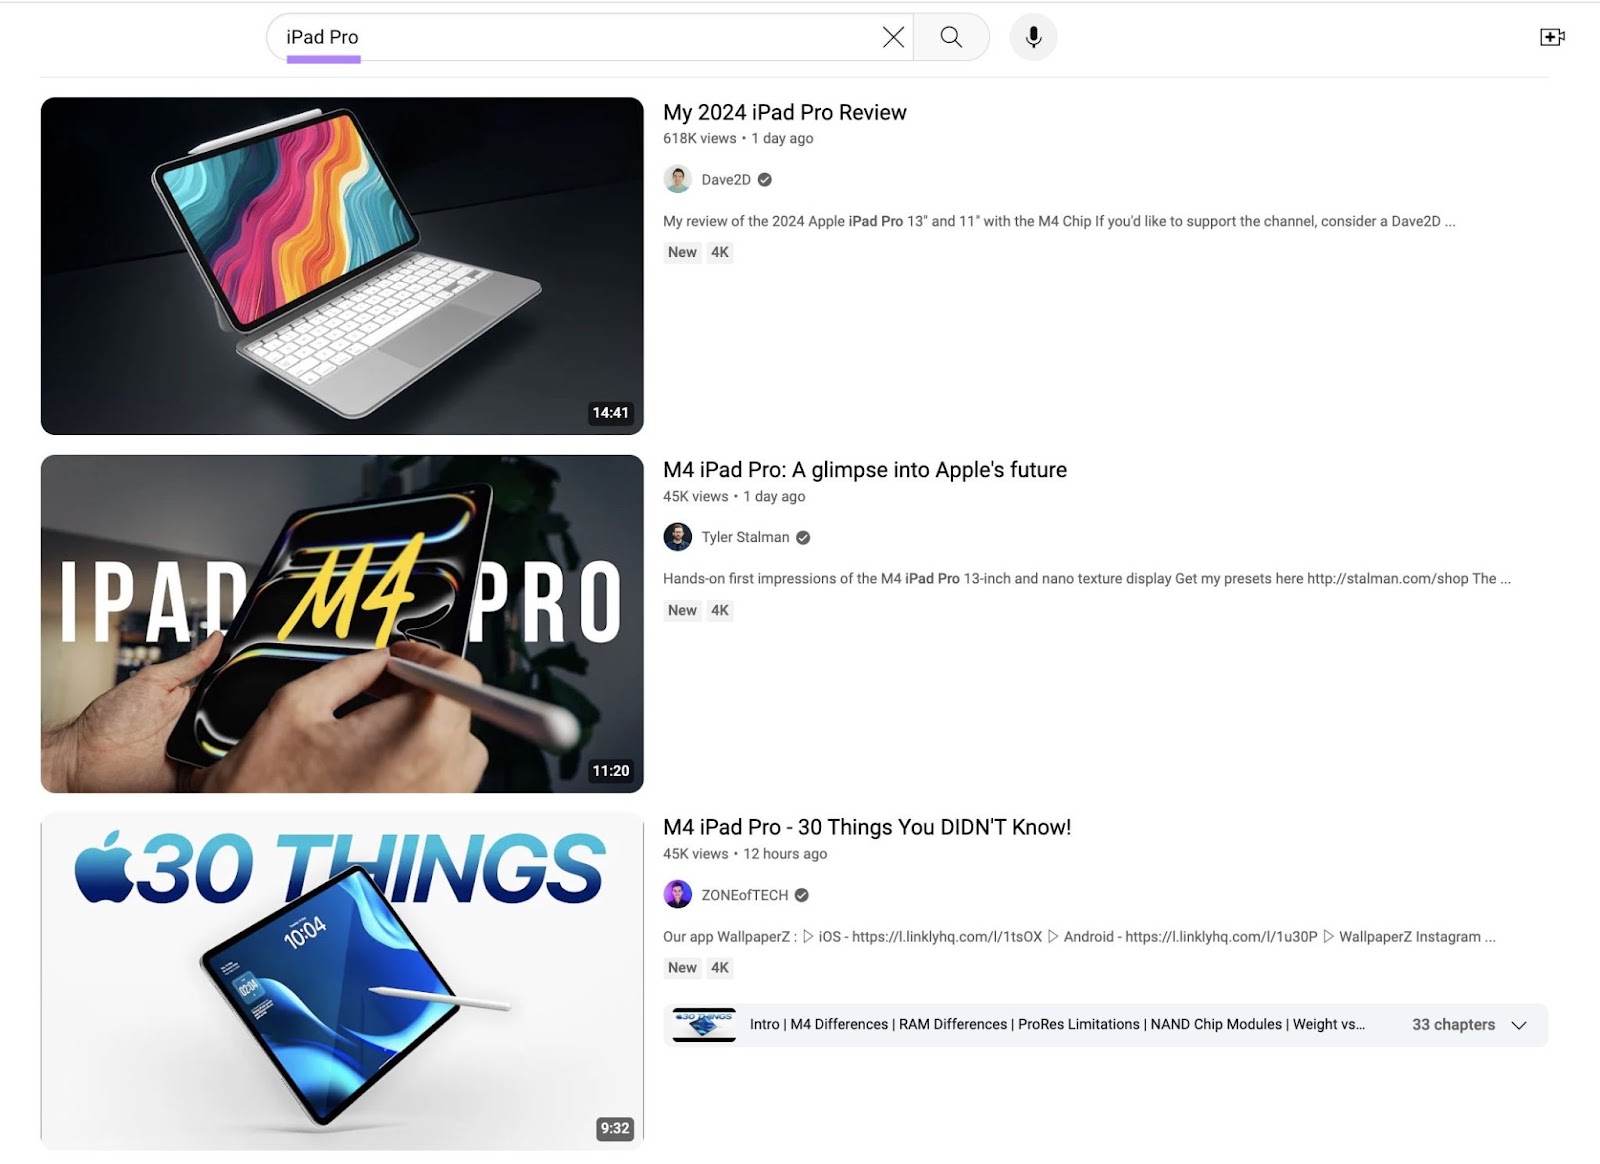 Youtube SERP for the term “iPad Pro”.